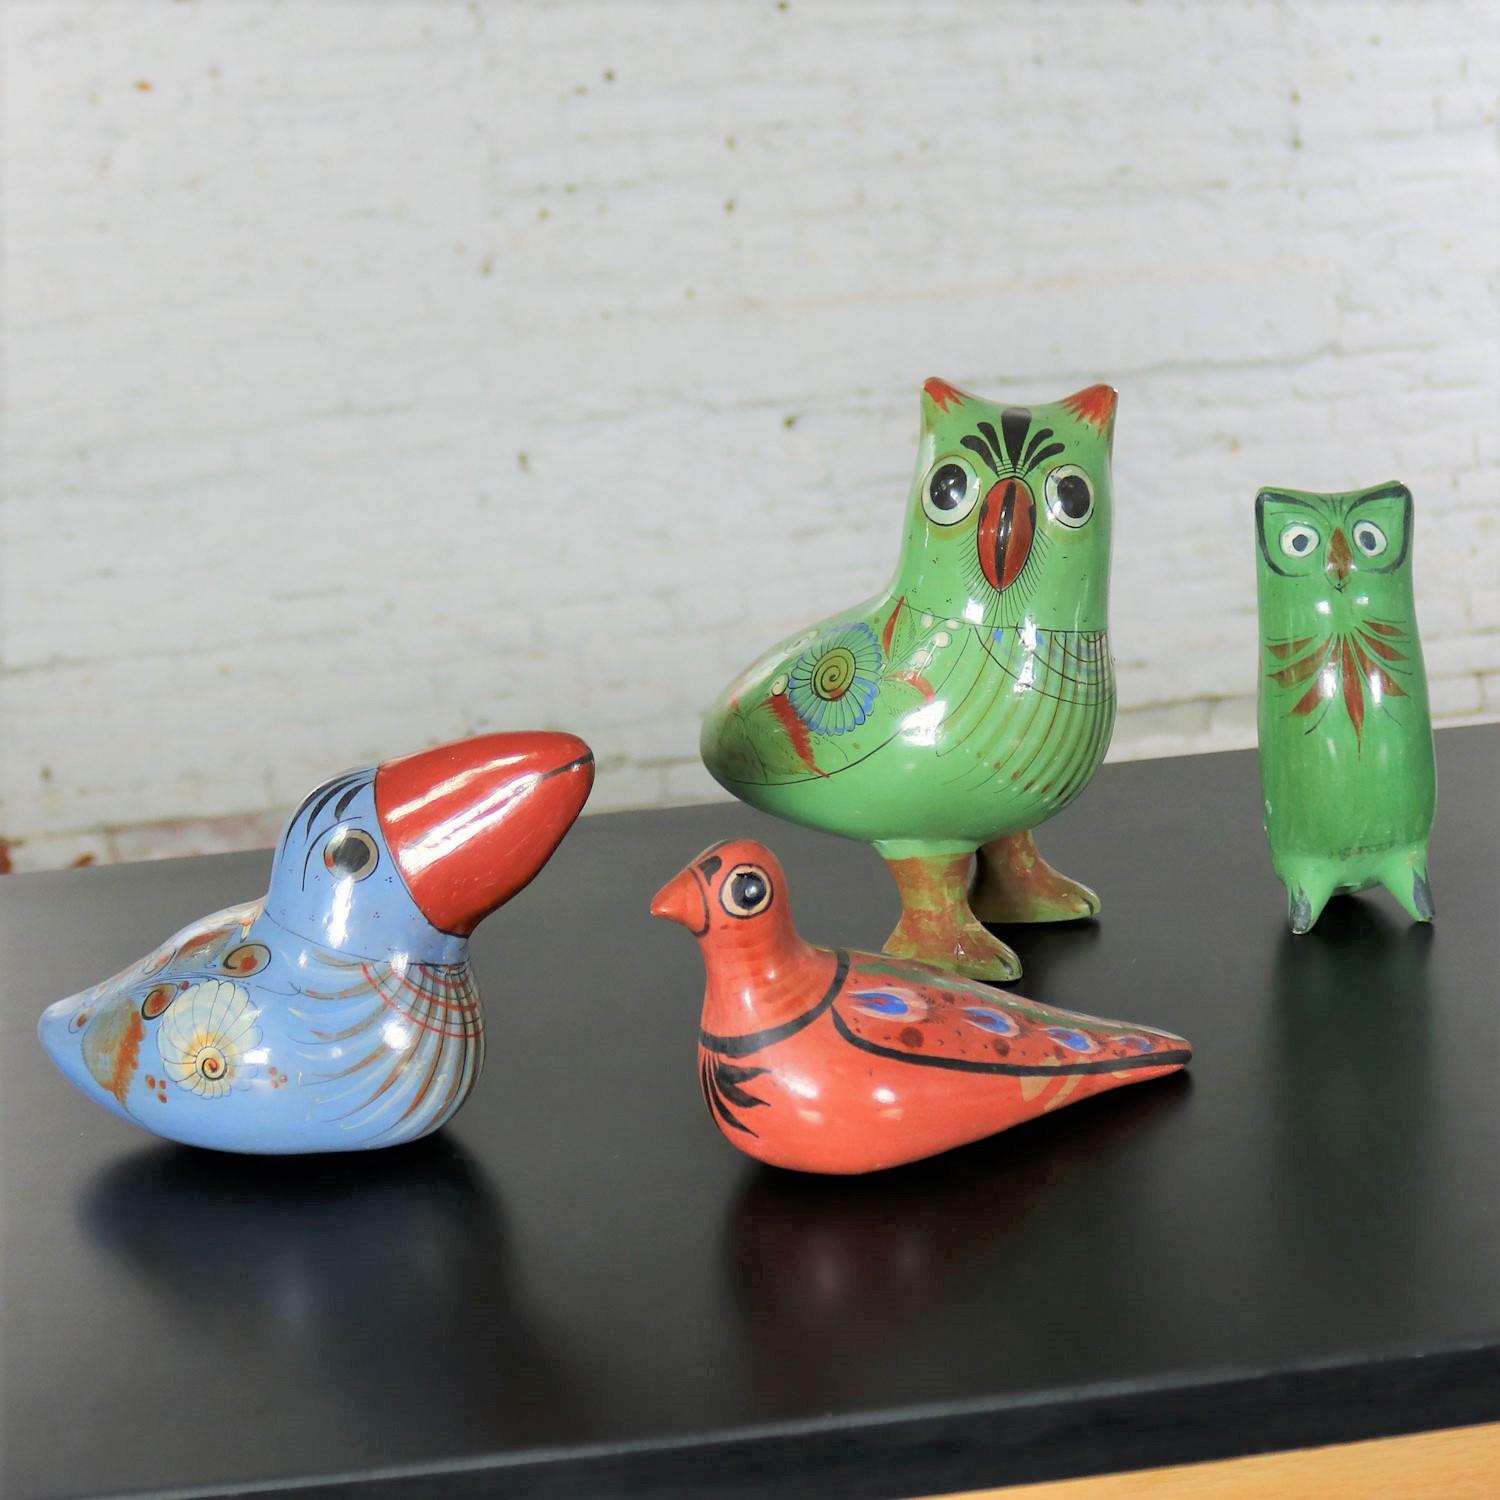 Instant collection of four hand painted midcentury vintage Tonala pottery birds. Two green owls, one blue toucan, and one russet dove. They are all marked in some way, and all are in wonderful vintage condition. The large owl when tapped sounds like